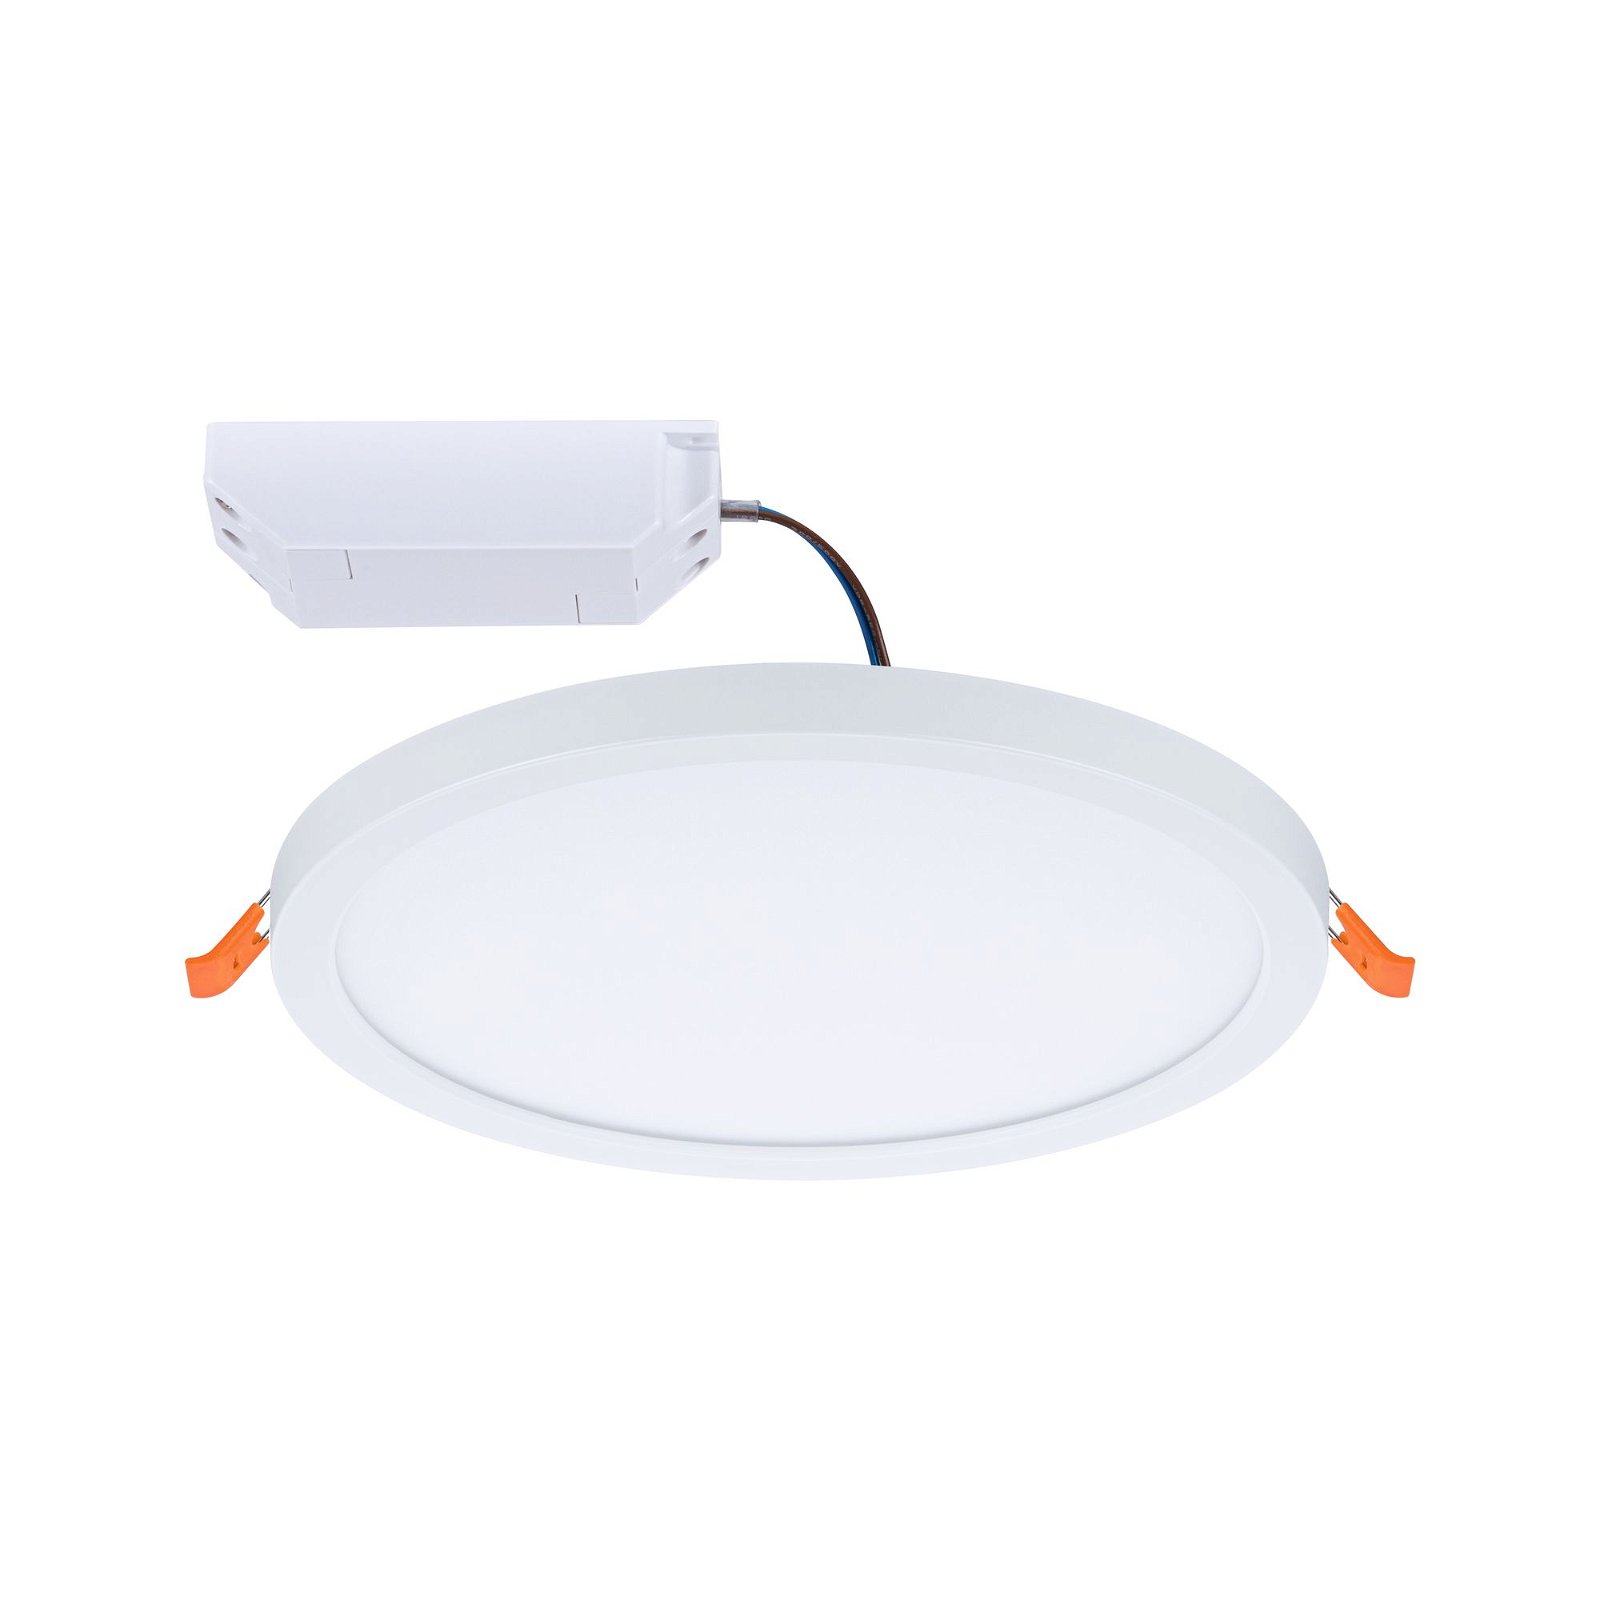 VariFit LED Recessed panel 3-Step-Dim Areo IP44 round 175mm 13W 1200lm 3000K White dimmable